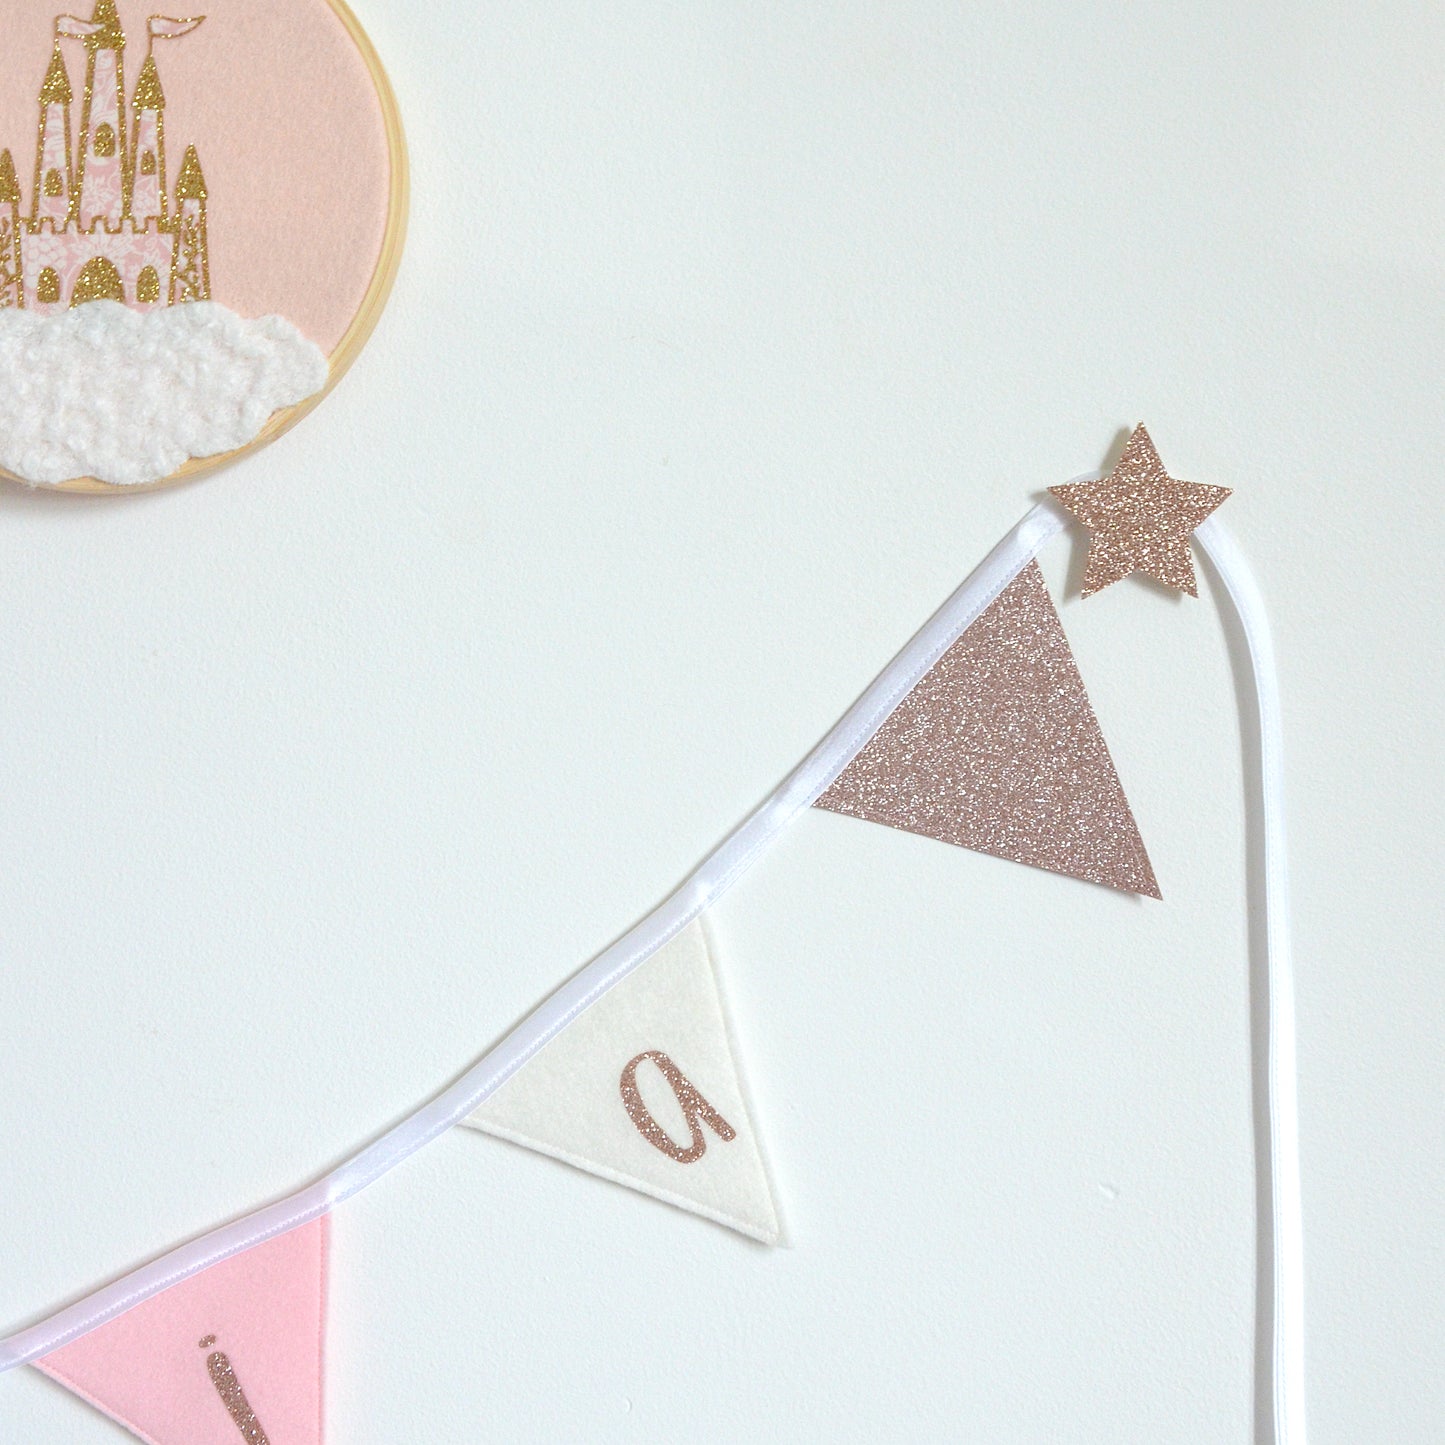 how to hang bunting. Sticky wall hooks